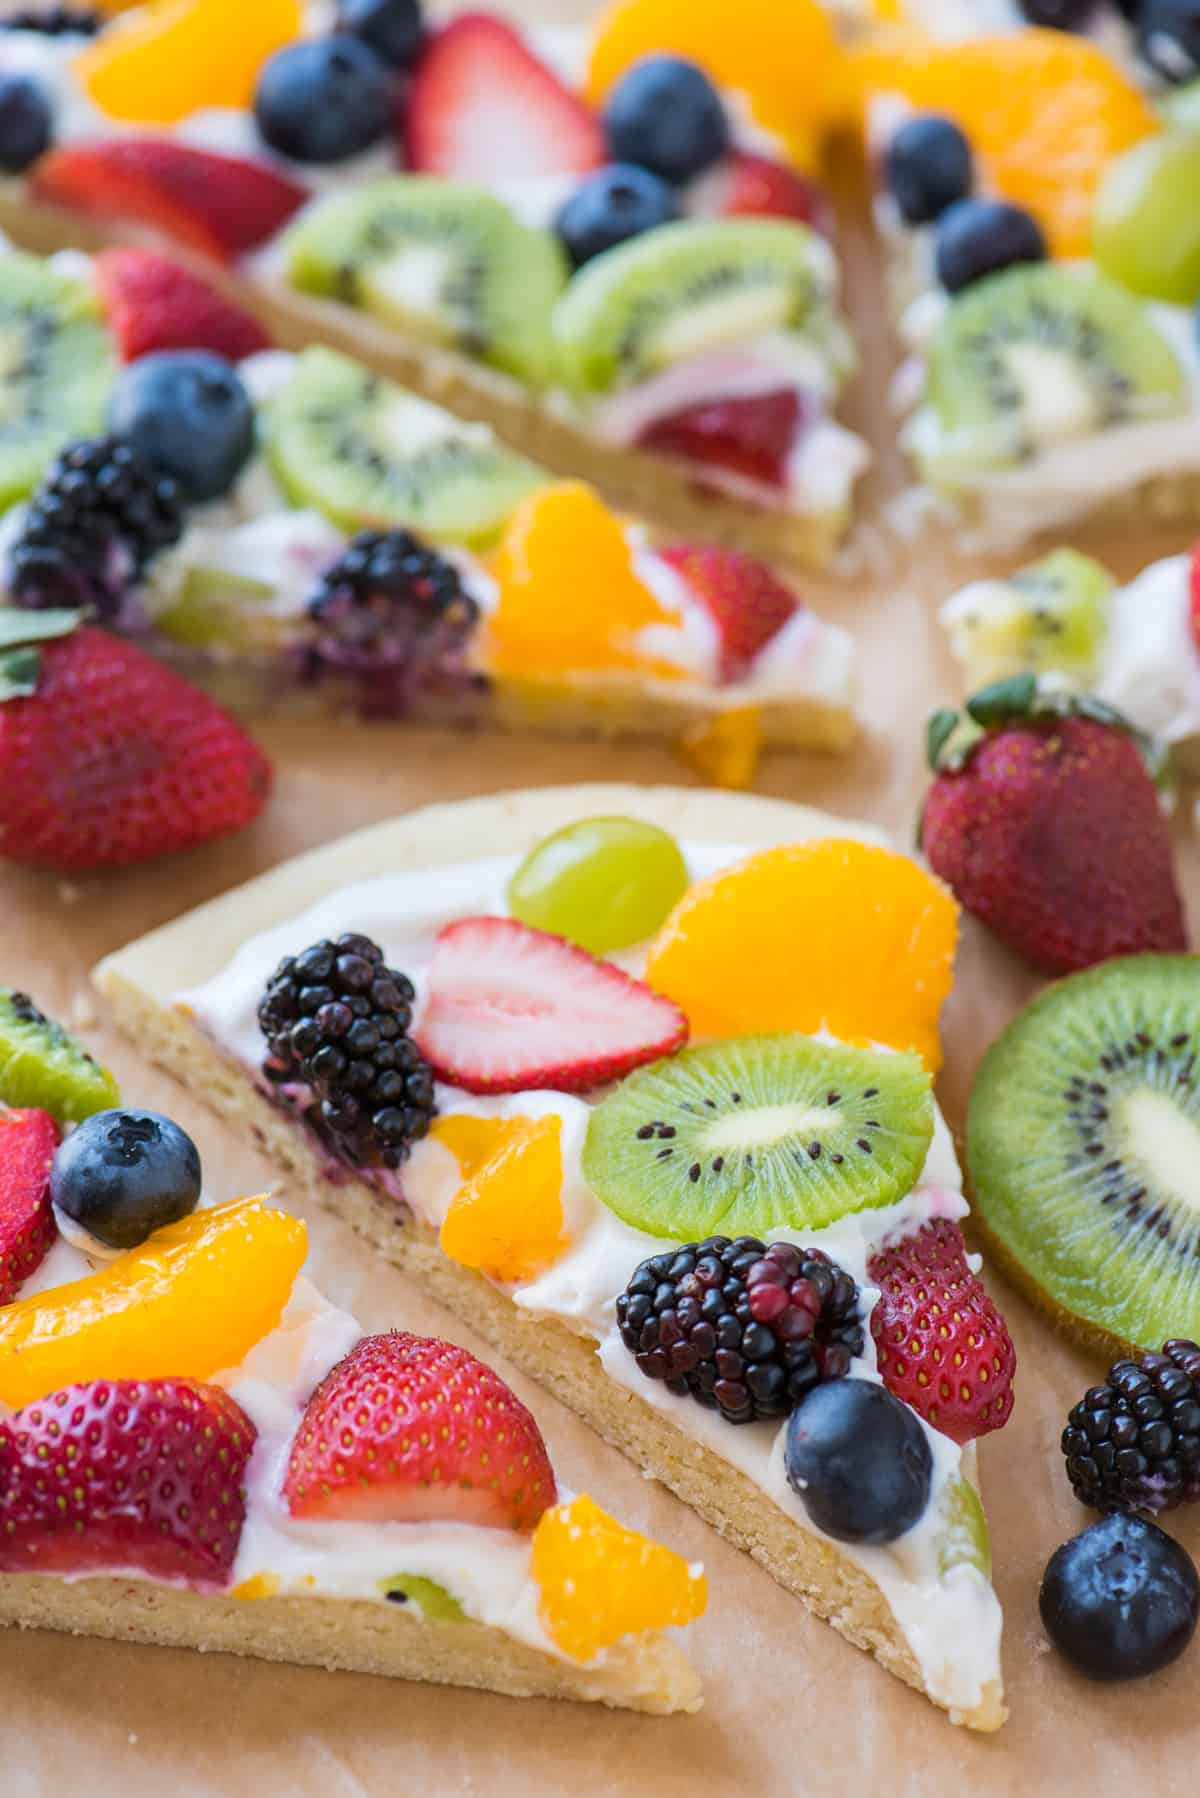 slice of fruit pizza strawberries, blueberries, mandarin oranges, kiwis and grapes on brown parchment paper